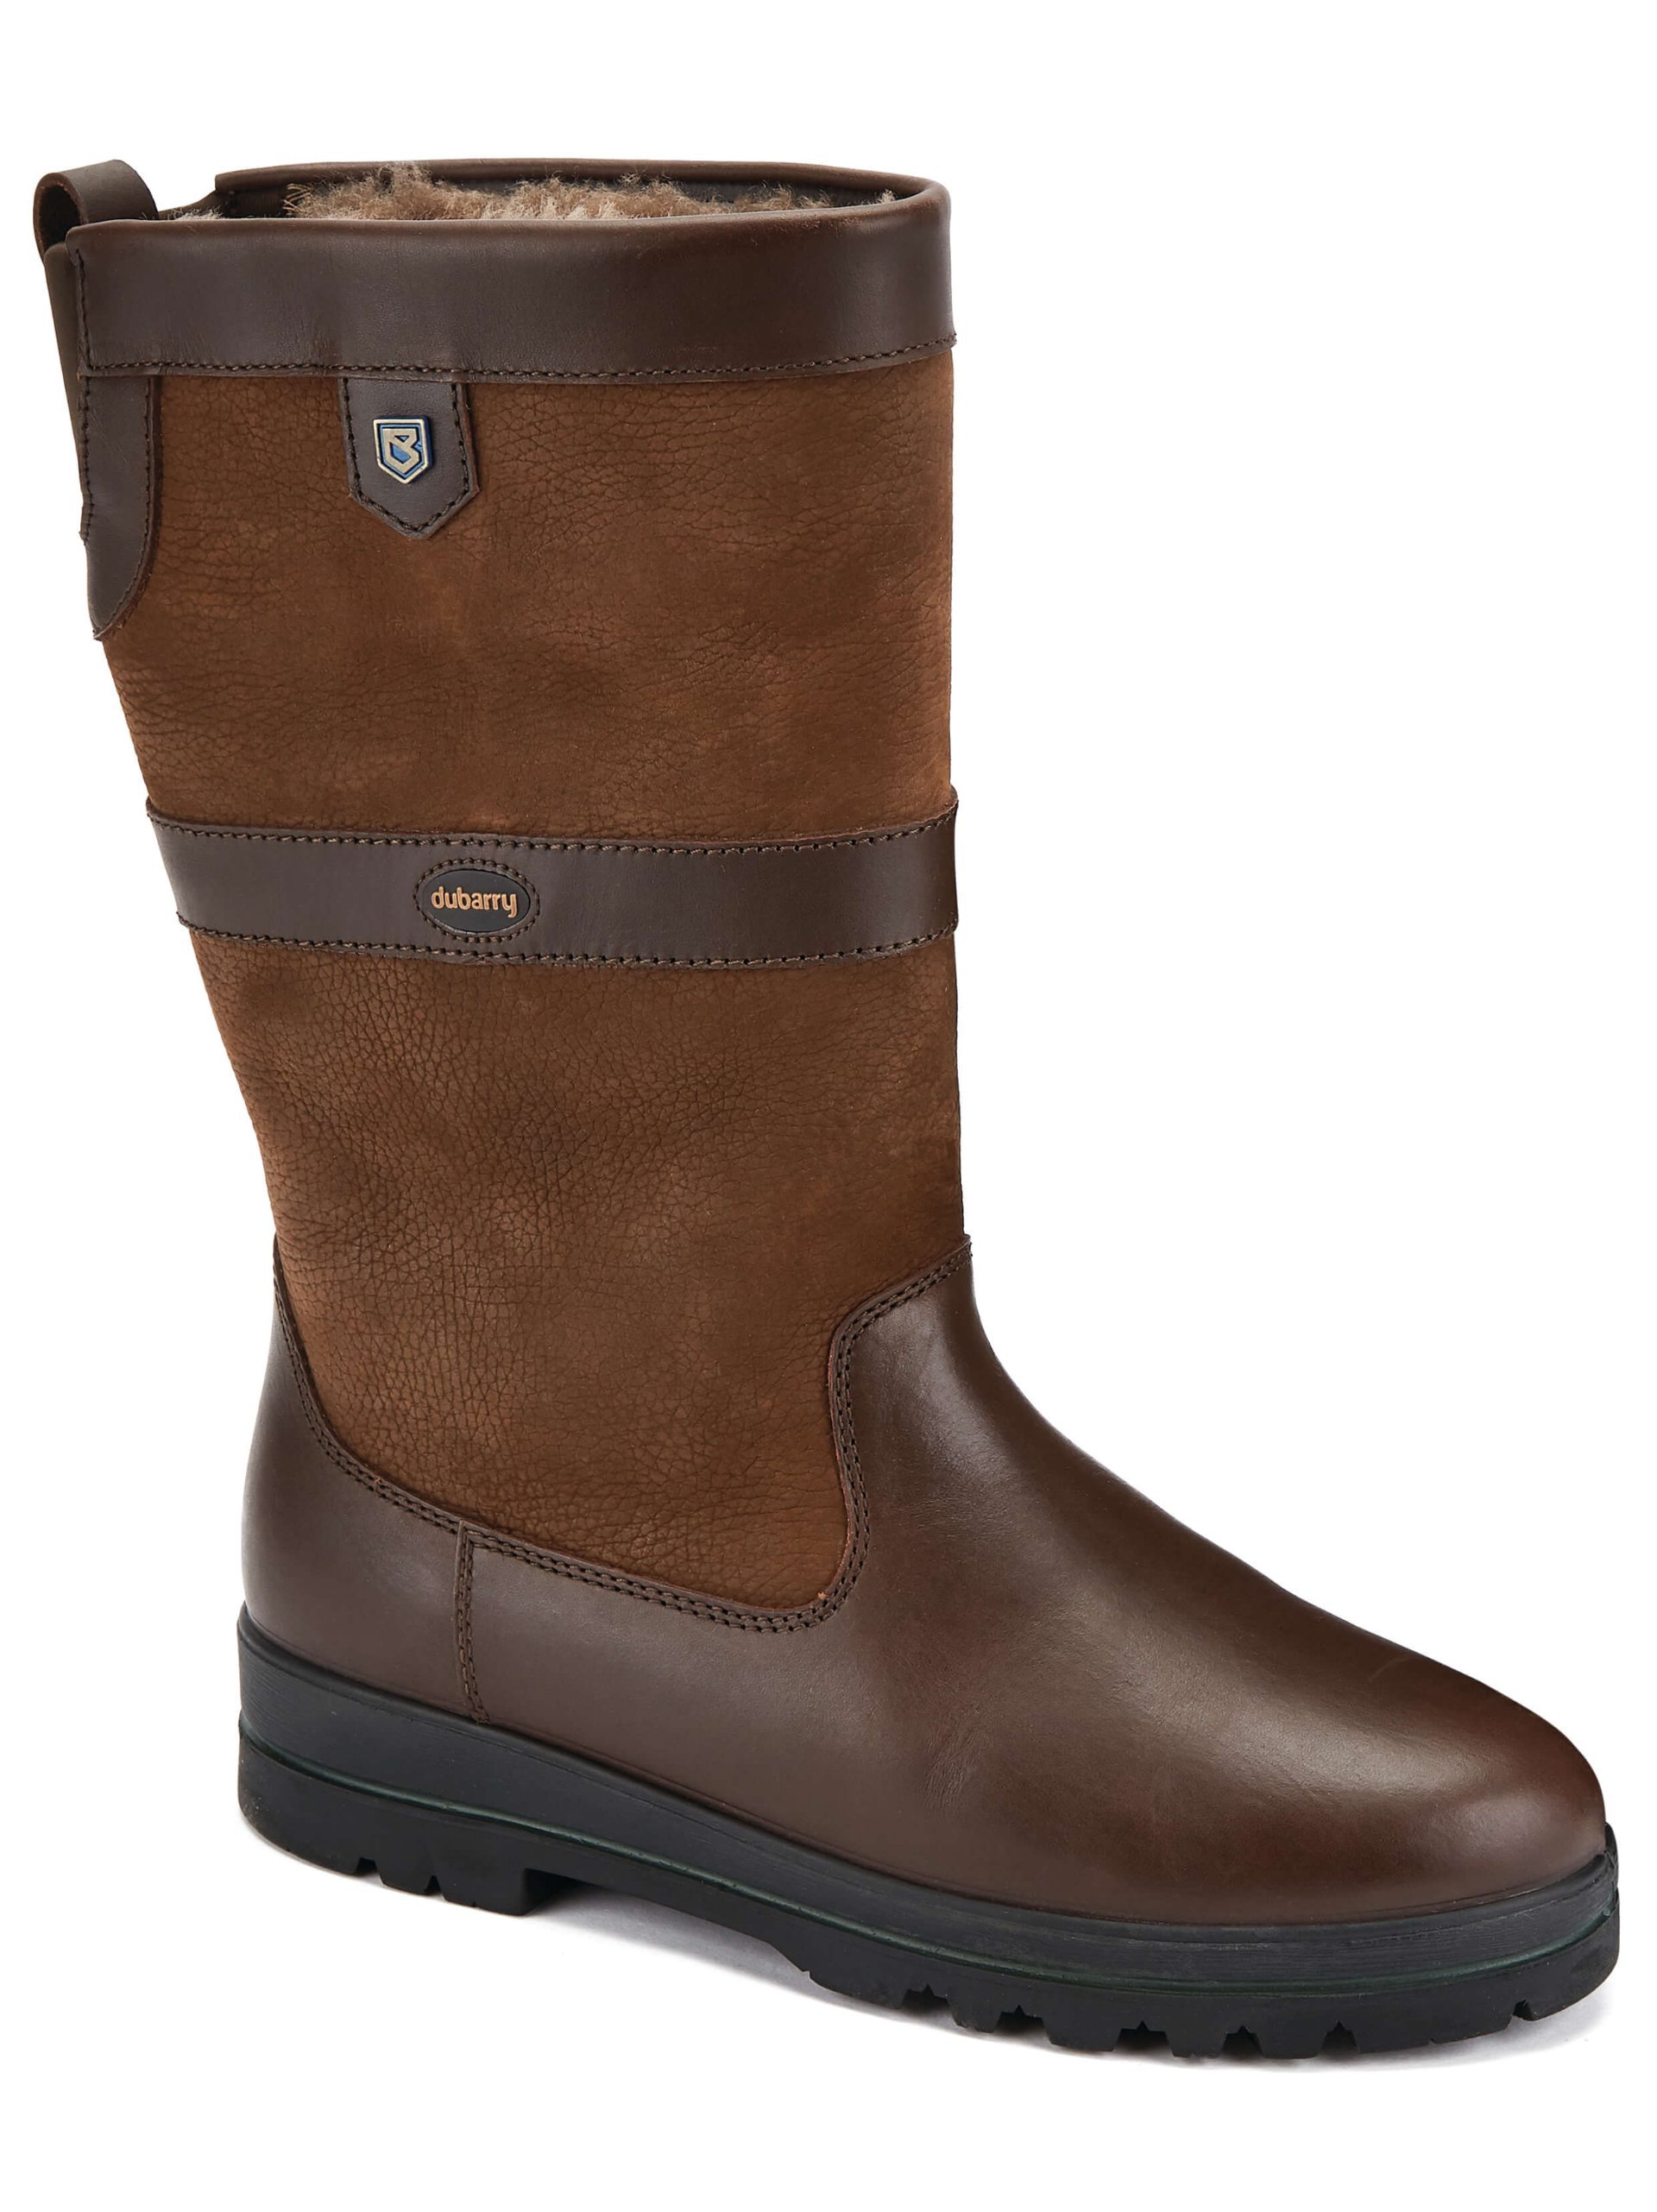 Dubarry Donegal - Stiefel